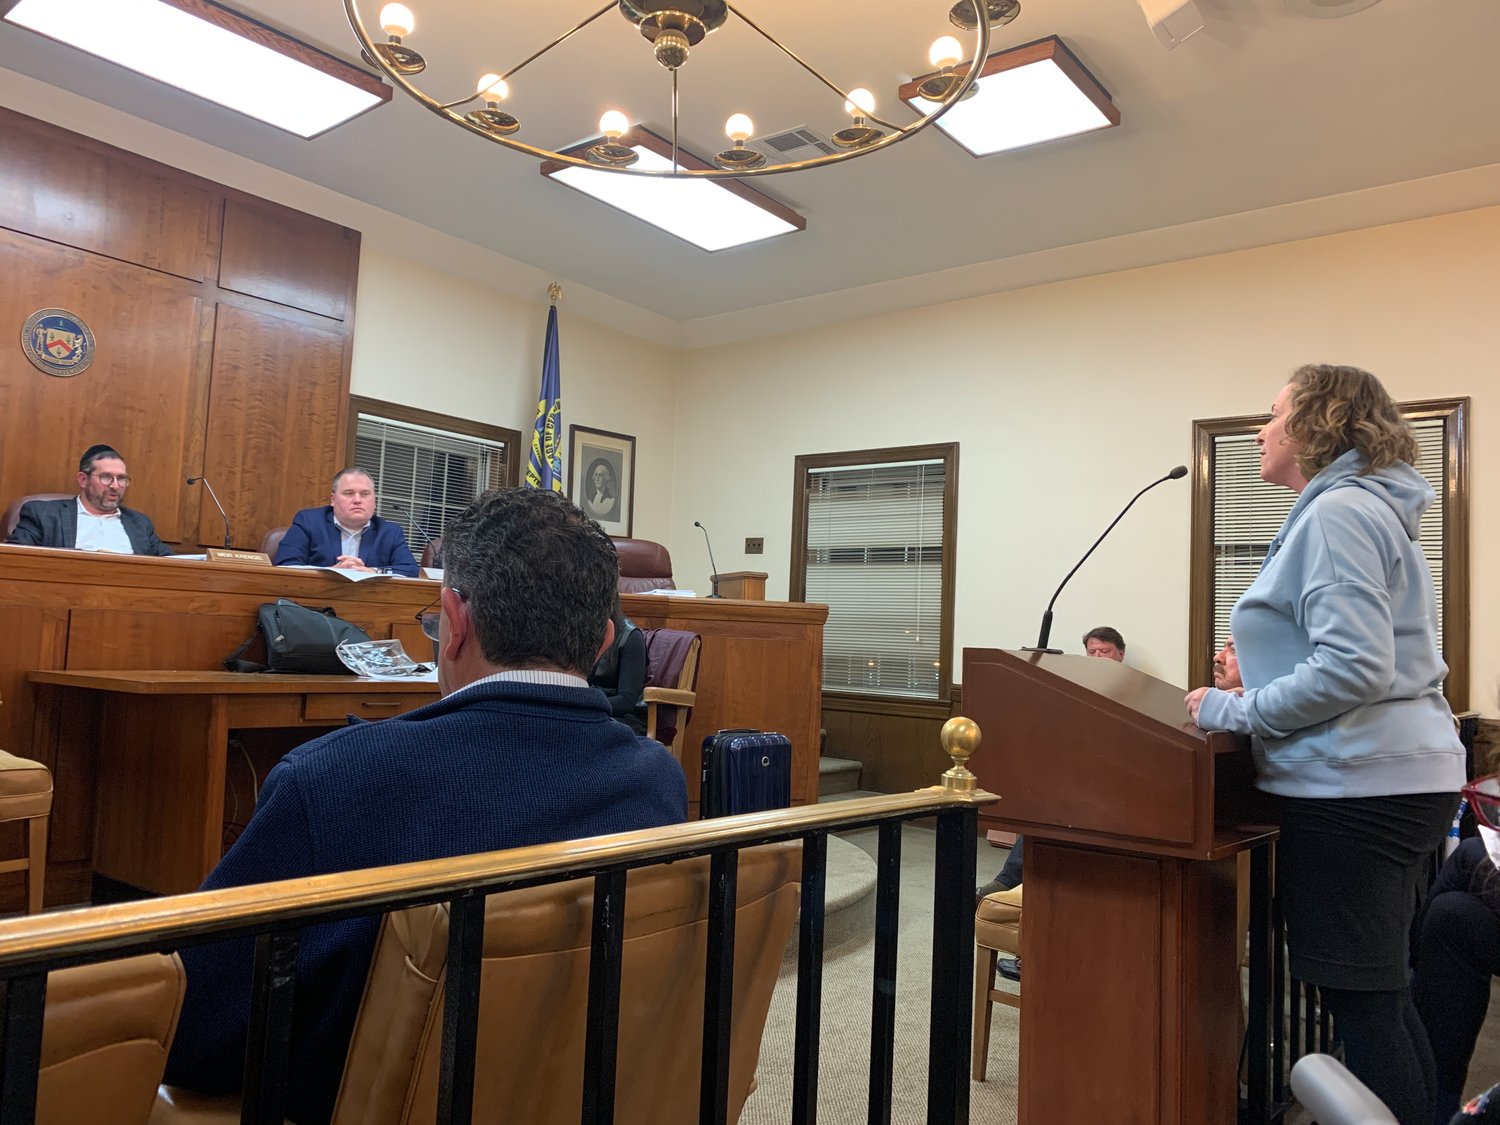 Cedarhurst resident Rena Saffra expressed her frustration to the appeals board on the proposal to build a 17-apartment development on densely populated Washington Avenue.